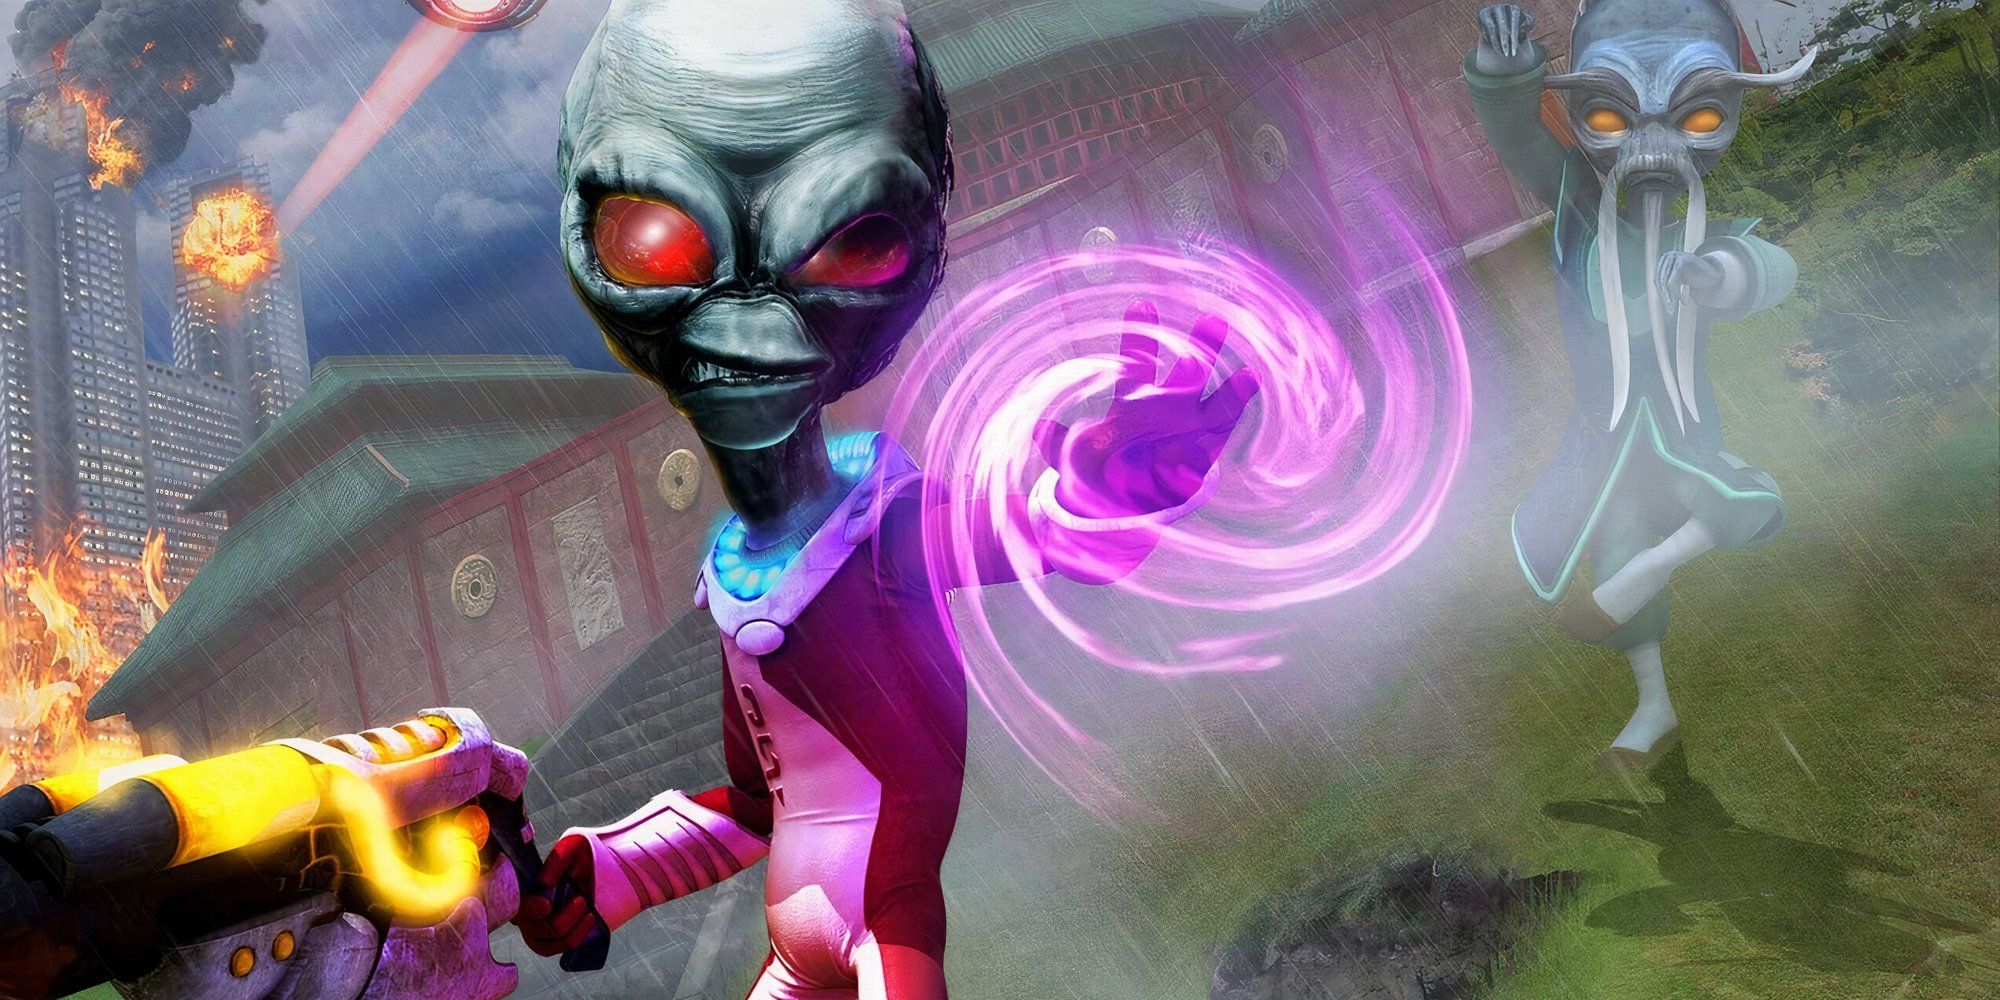 Promo art featuring characters in Destroy All Humans Big Willy Unleashed